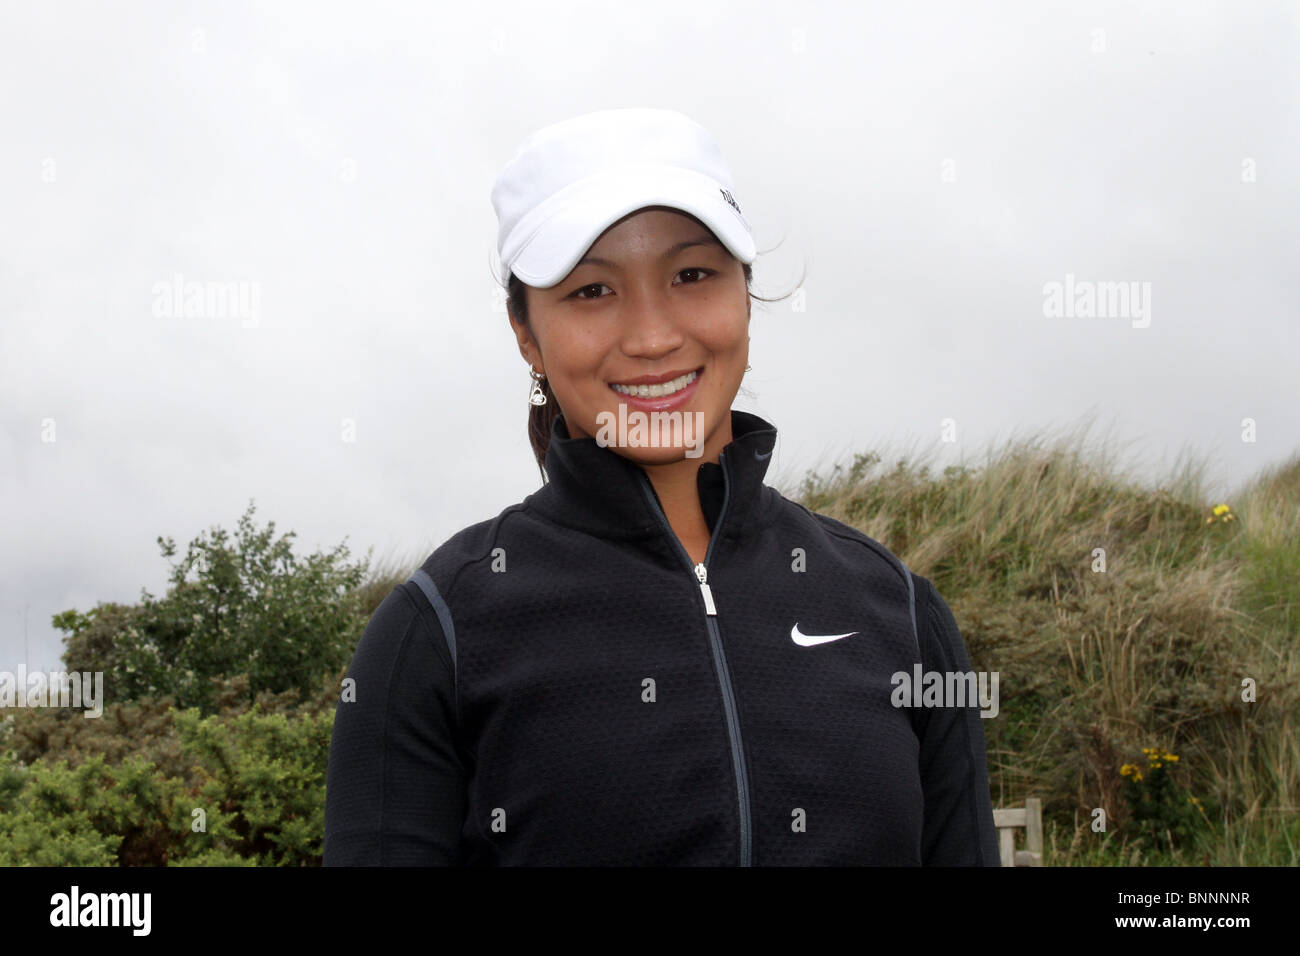 35th Ricoh Women's British Open at The Royal Birkdale Golf Club, Southport, Merseyside, UK Stock Photo